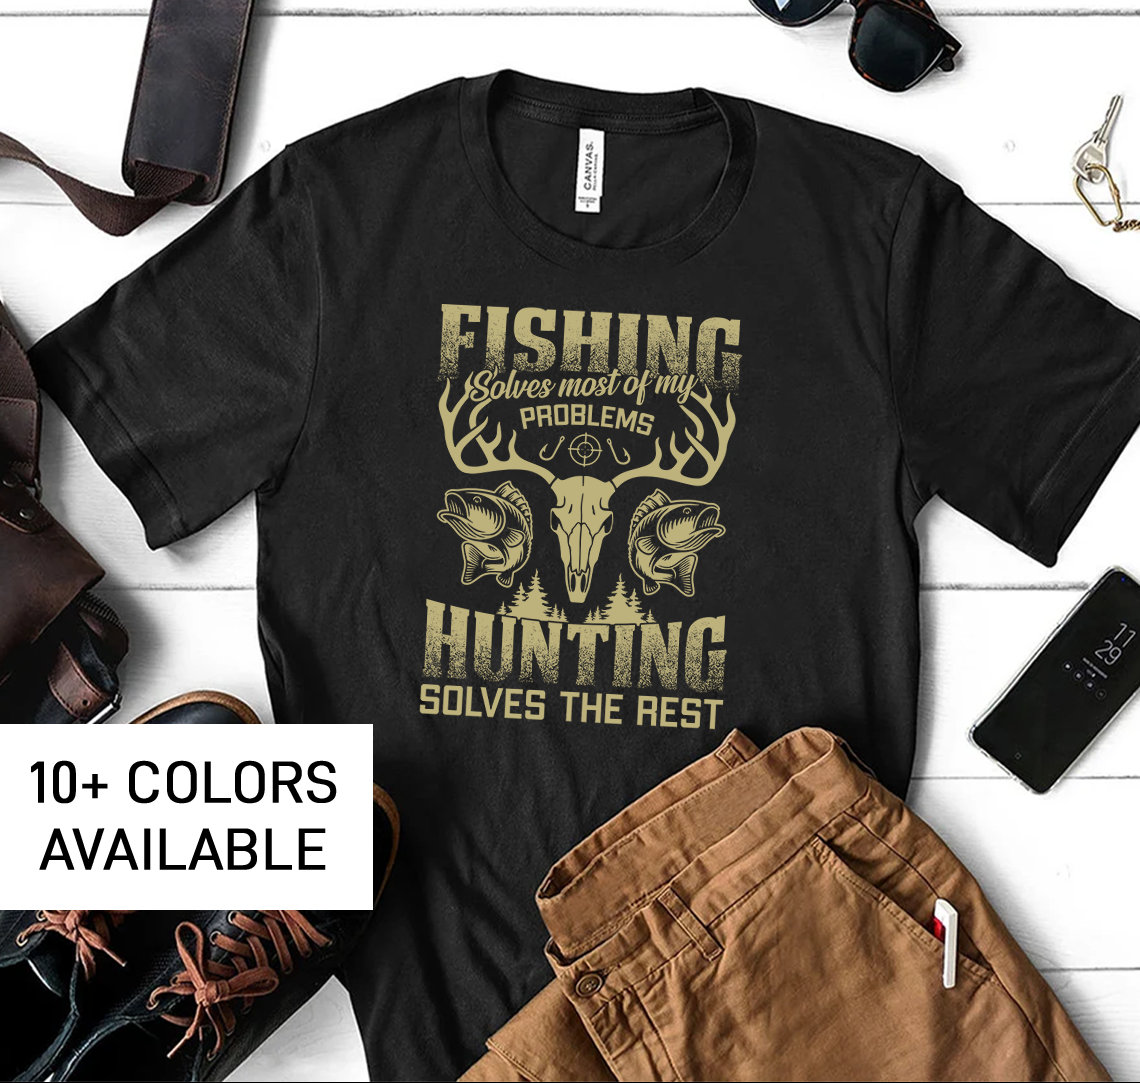 Fishing and Hunting Shirt for Men, Funny Fishing Tshirt for Fathers Day Gift, Funny Mens Hunting Tshirt for Men, Fishing T-Shirt for Husband